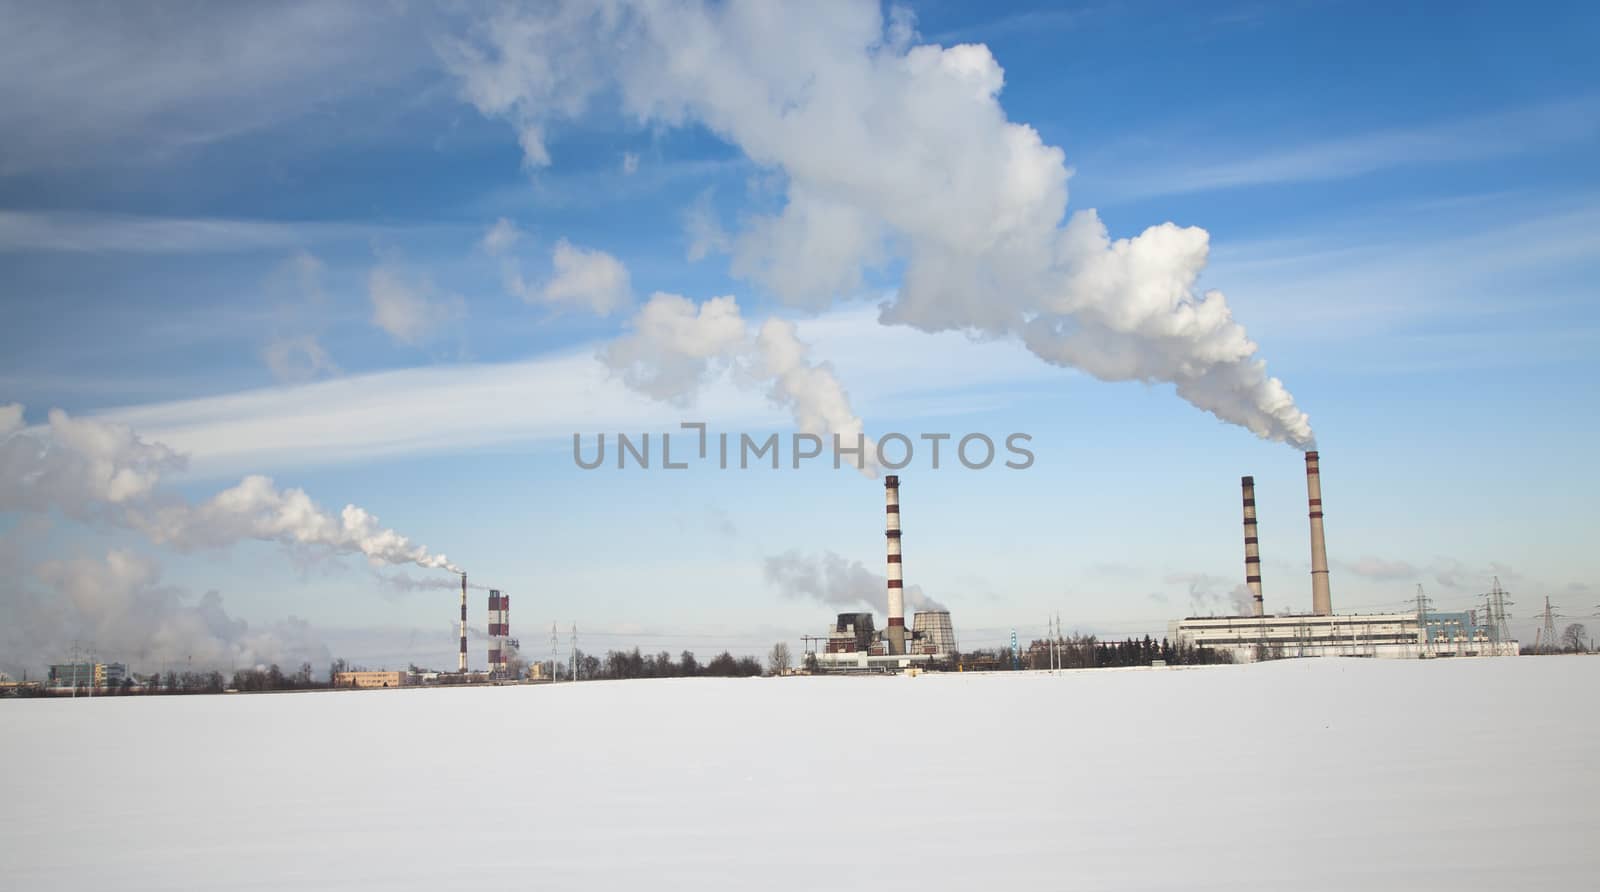   the power plant photographed in a winter season. Belarus